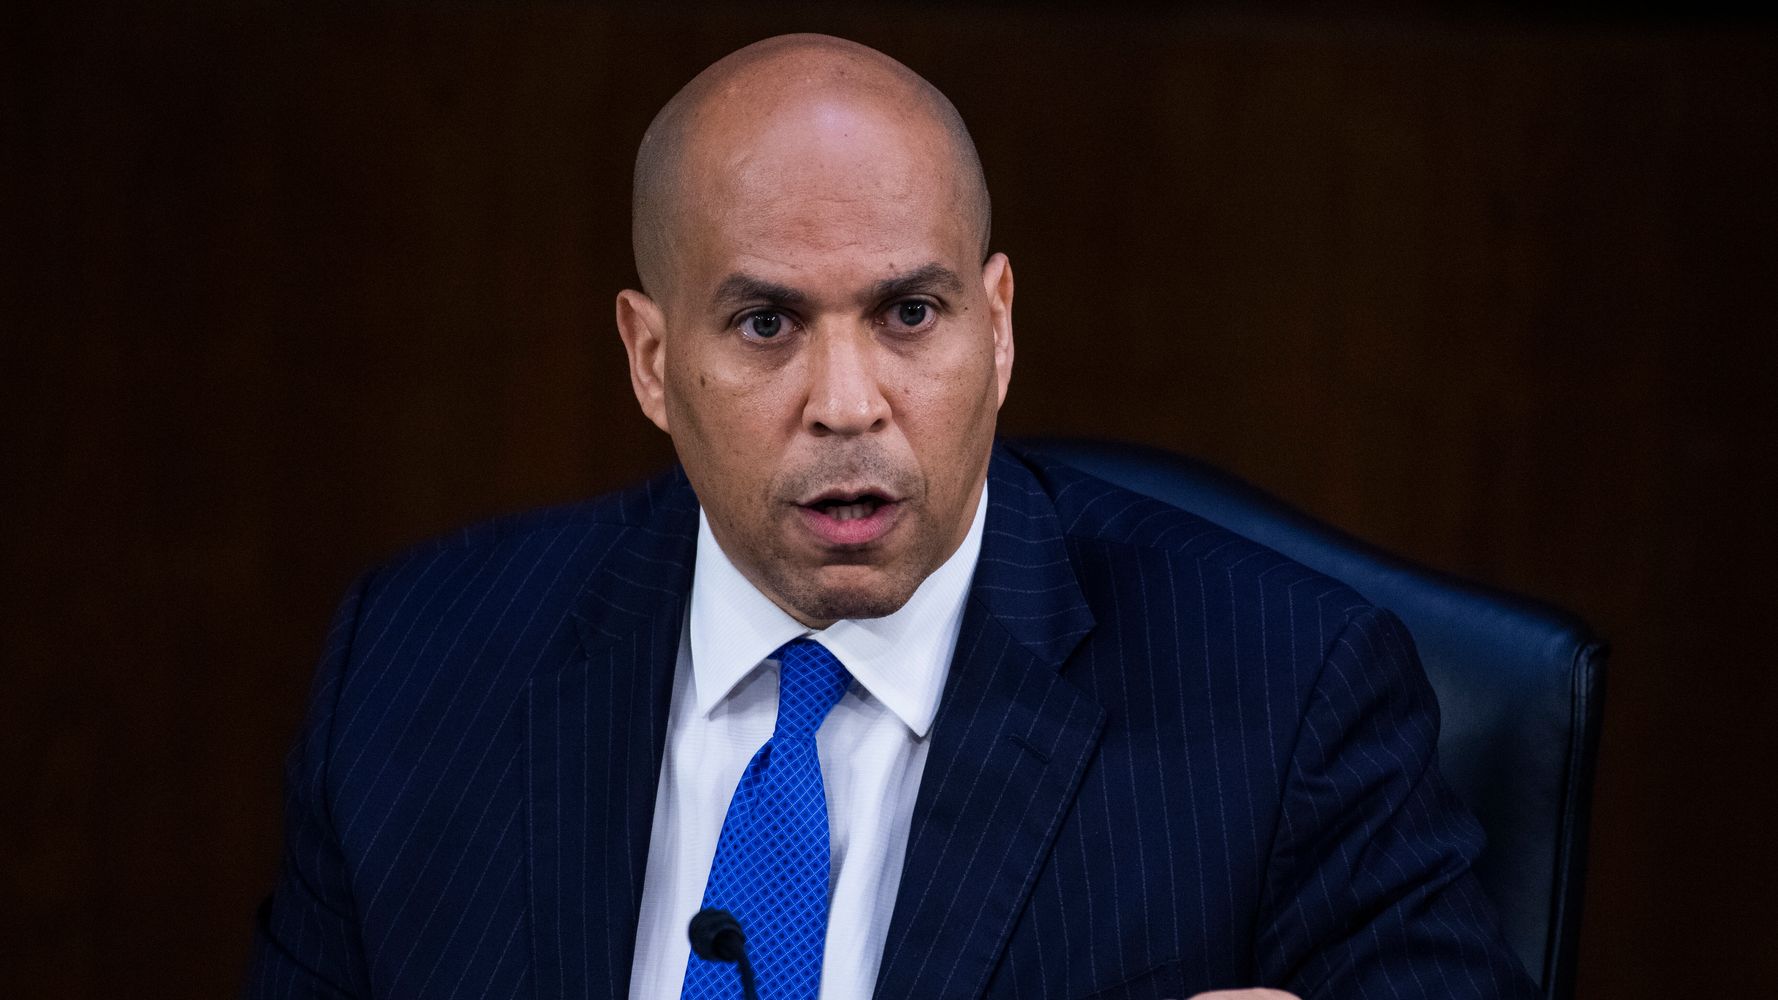 Cory Booker Slams 'Racist' House GOP Candidate Madison Cawthorn